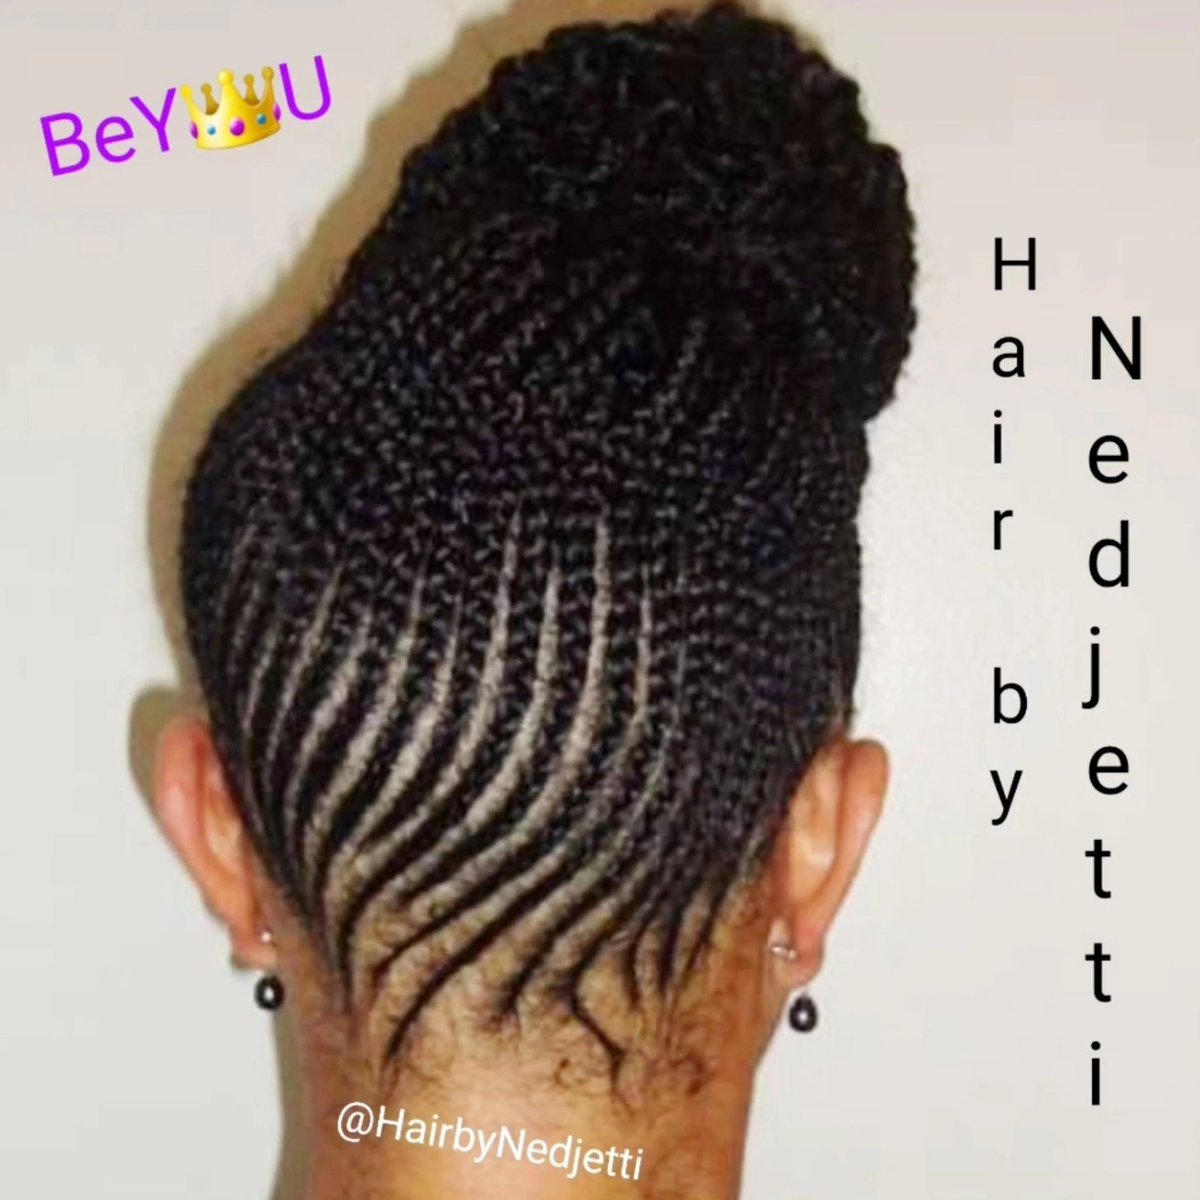 #HairMeOut® #Naturalistas Spring is in our #Coils & #Curls visit #NedjettiHarvey #ForTheCulture 5🌟 rated #NaturalHair & #Locs #Salon in Bloomfield, #NewJersey ✂️

👩🏾‍💻 #Naturalista Book 
👉🏾StyleSeat.com/NedjettiHarvey 

#Springtime #Cornrows #protective #NaturalHairstyle it's a…